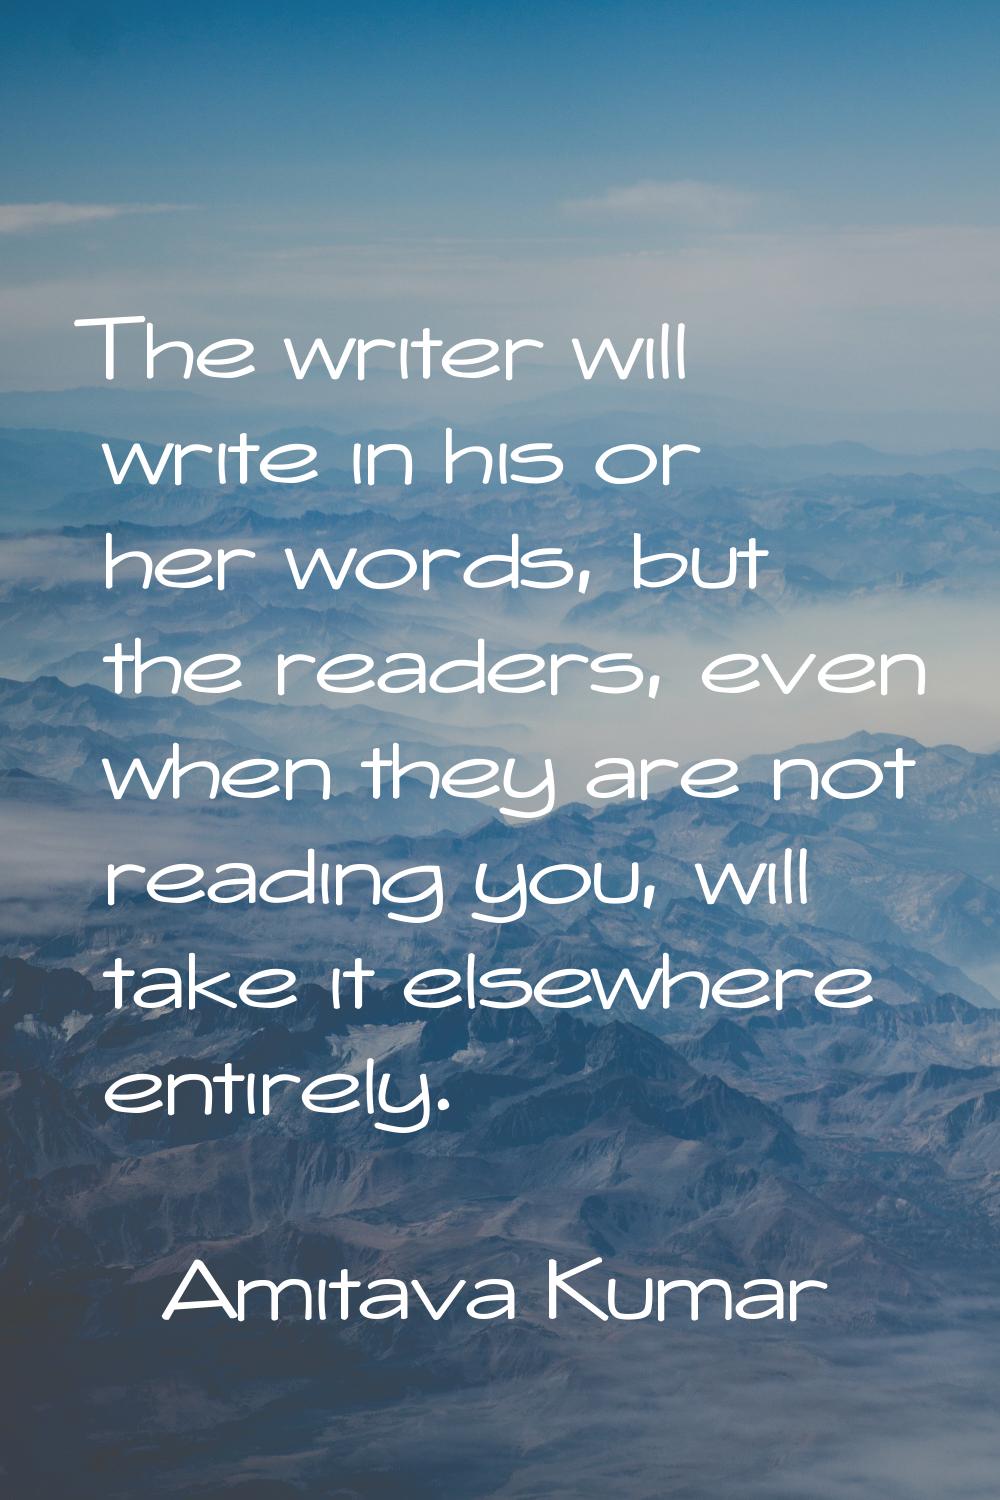 The writer will write in his or her words, but the readers, even when they are not reading you, wil